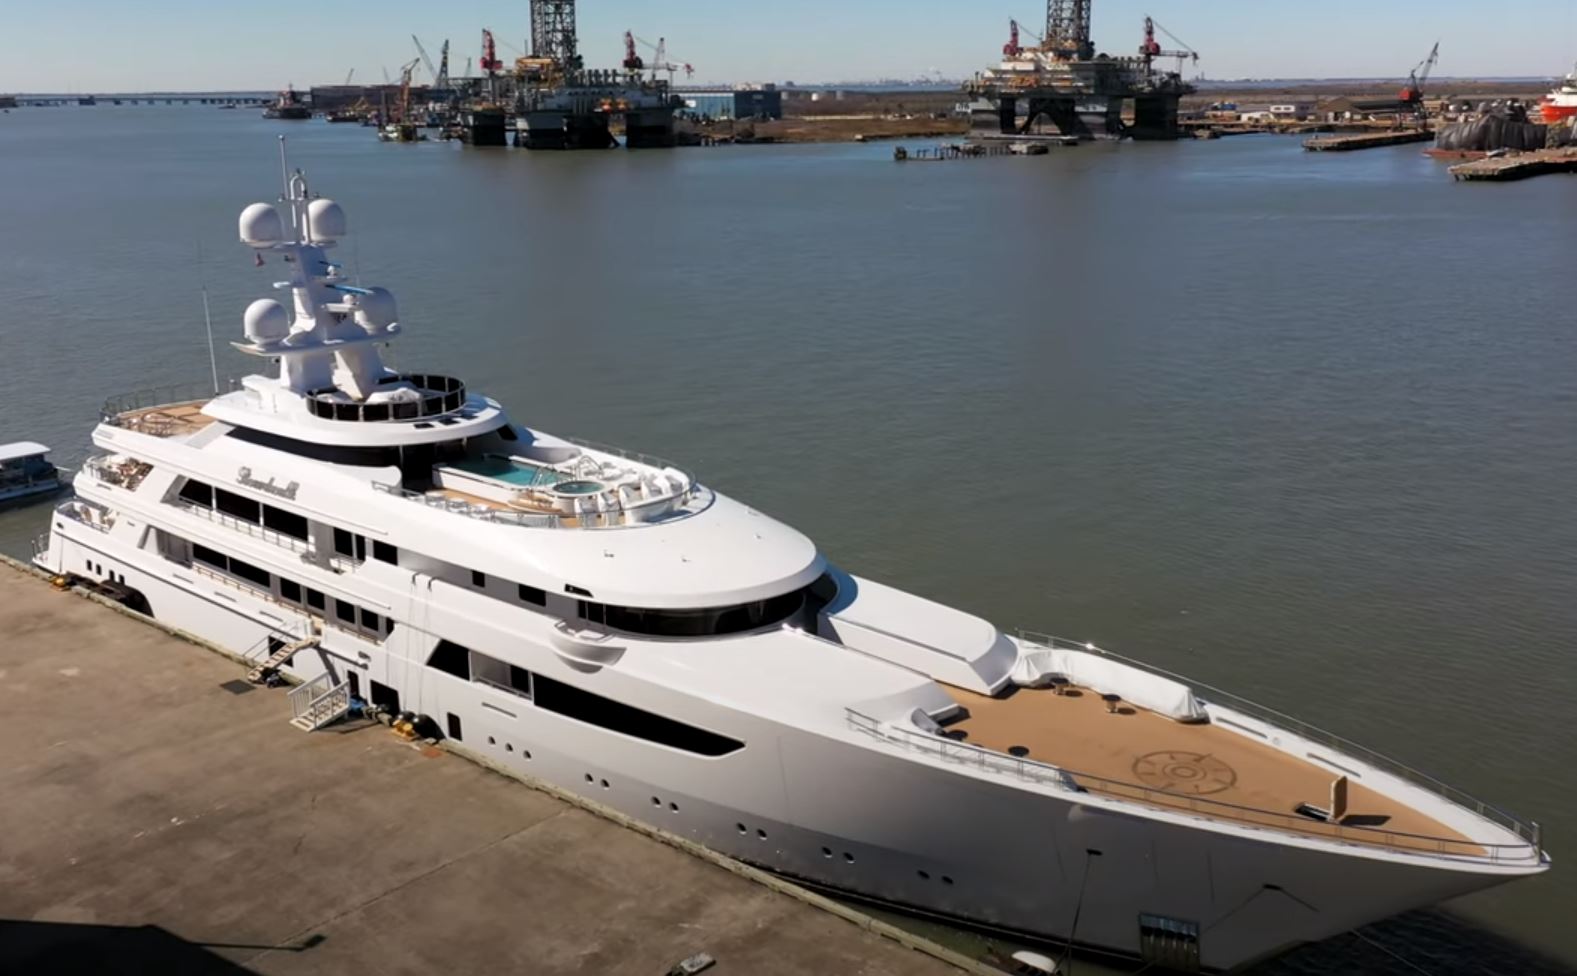 who owns the boardwalk yacht in galveston